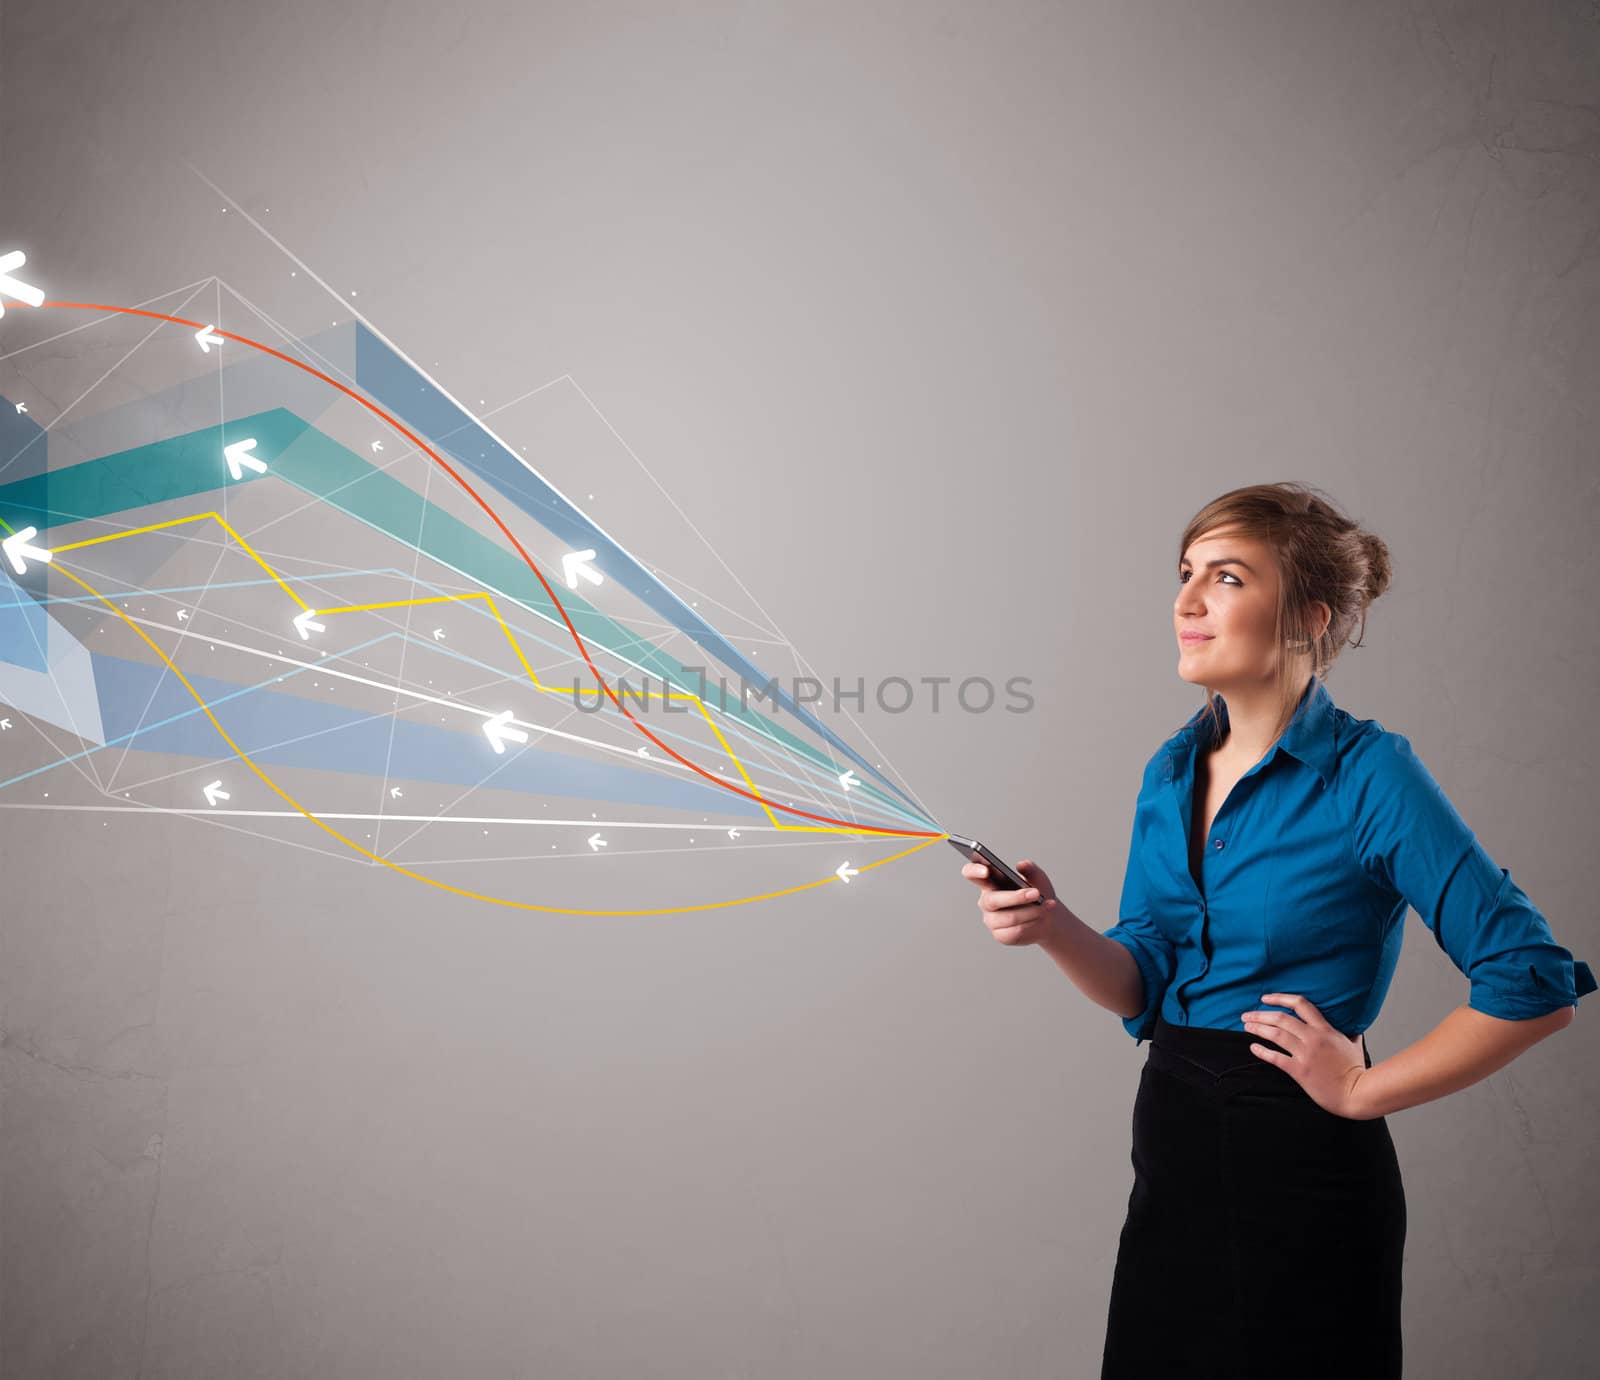 pretty young lady standing and holding a phone with colorful abstract lines and arrows